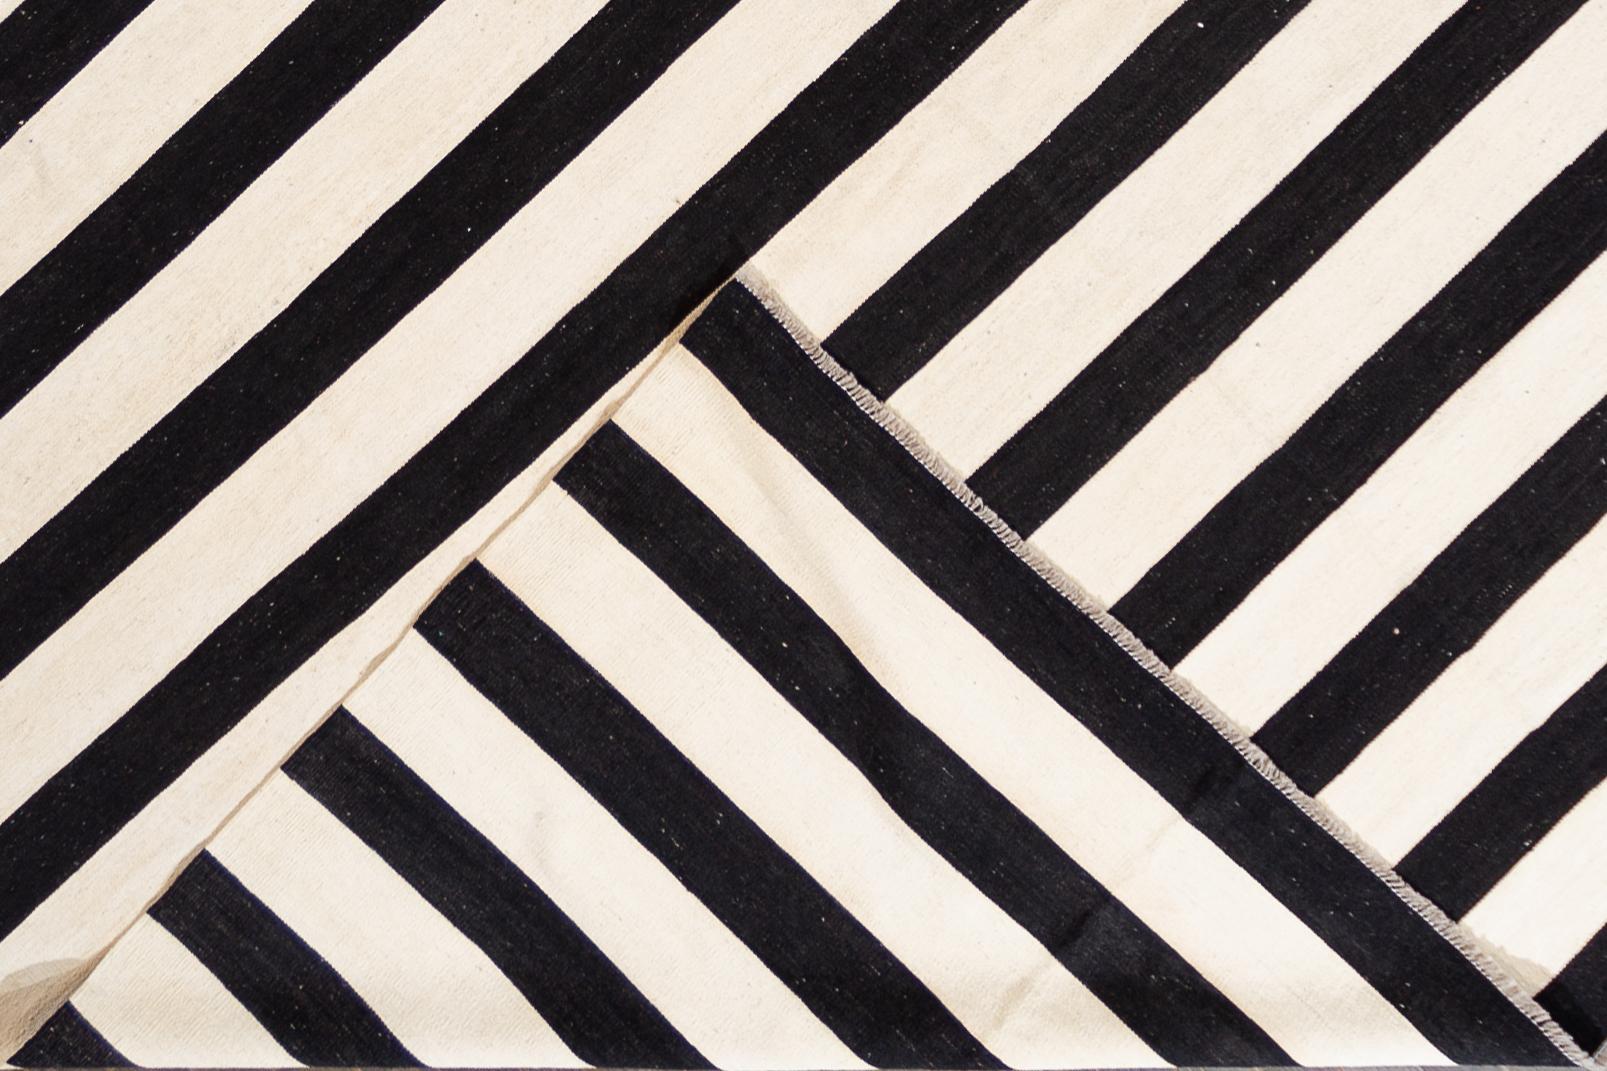 Asian Modern Kilim Black And White Flatweave Wool Rug With Striped Design For Sale